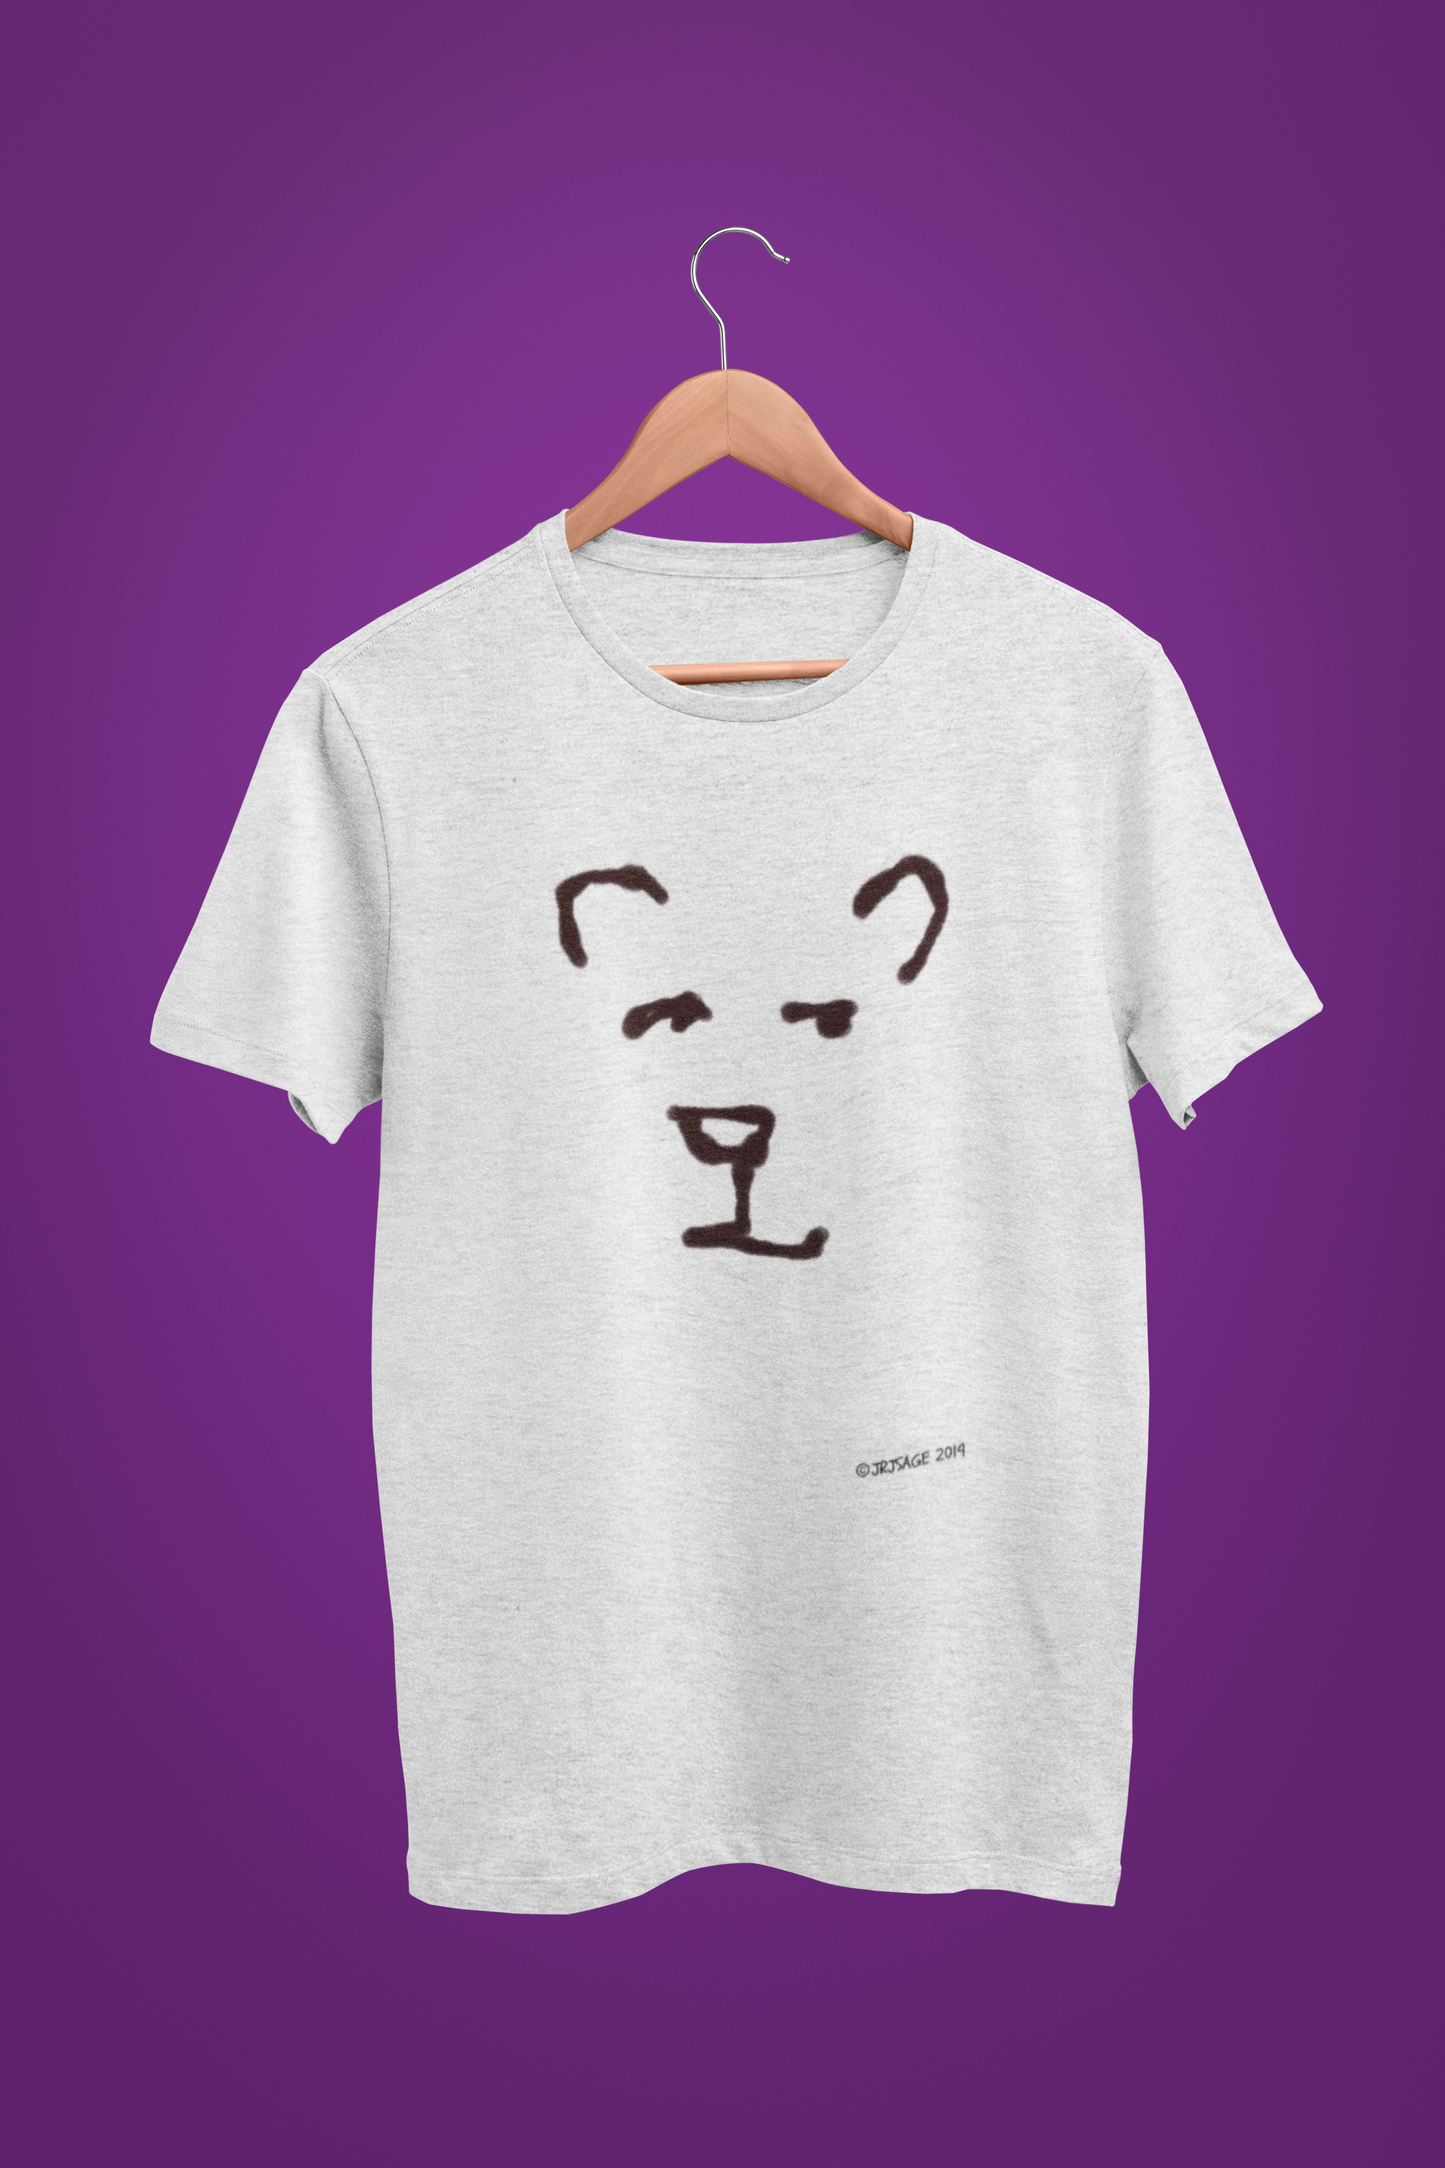 Polar Bear T-shirt by Hector and Bone - cute Polar Bear face illustrated vegan cotton t-shirts - Cream Heather Grey - 10% of Sales Donated to WWF